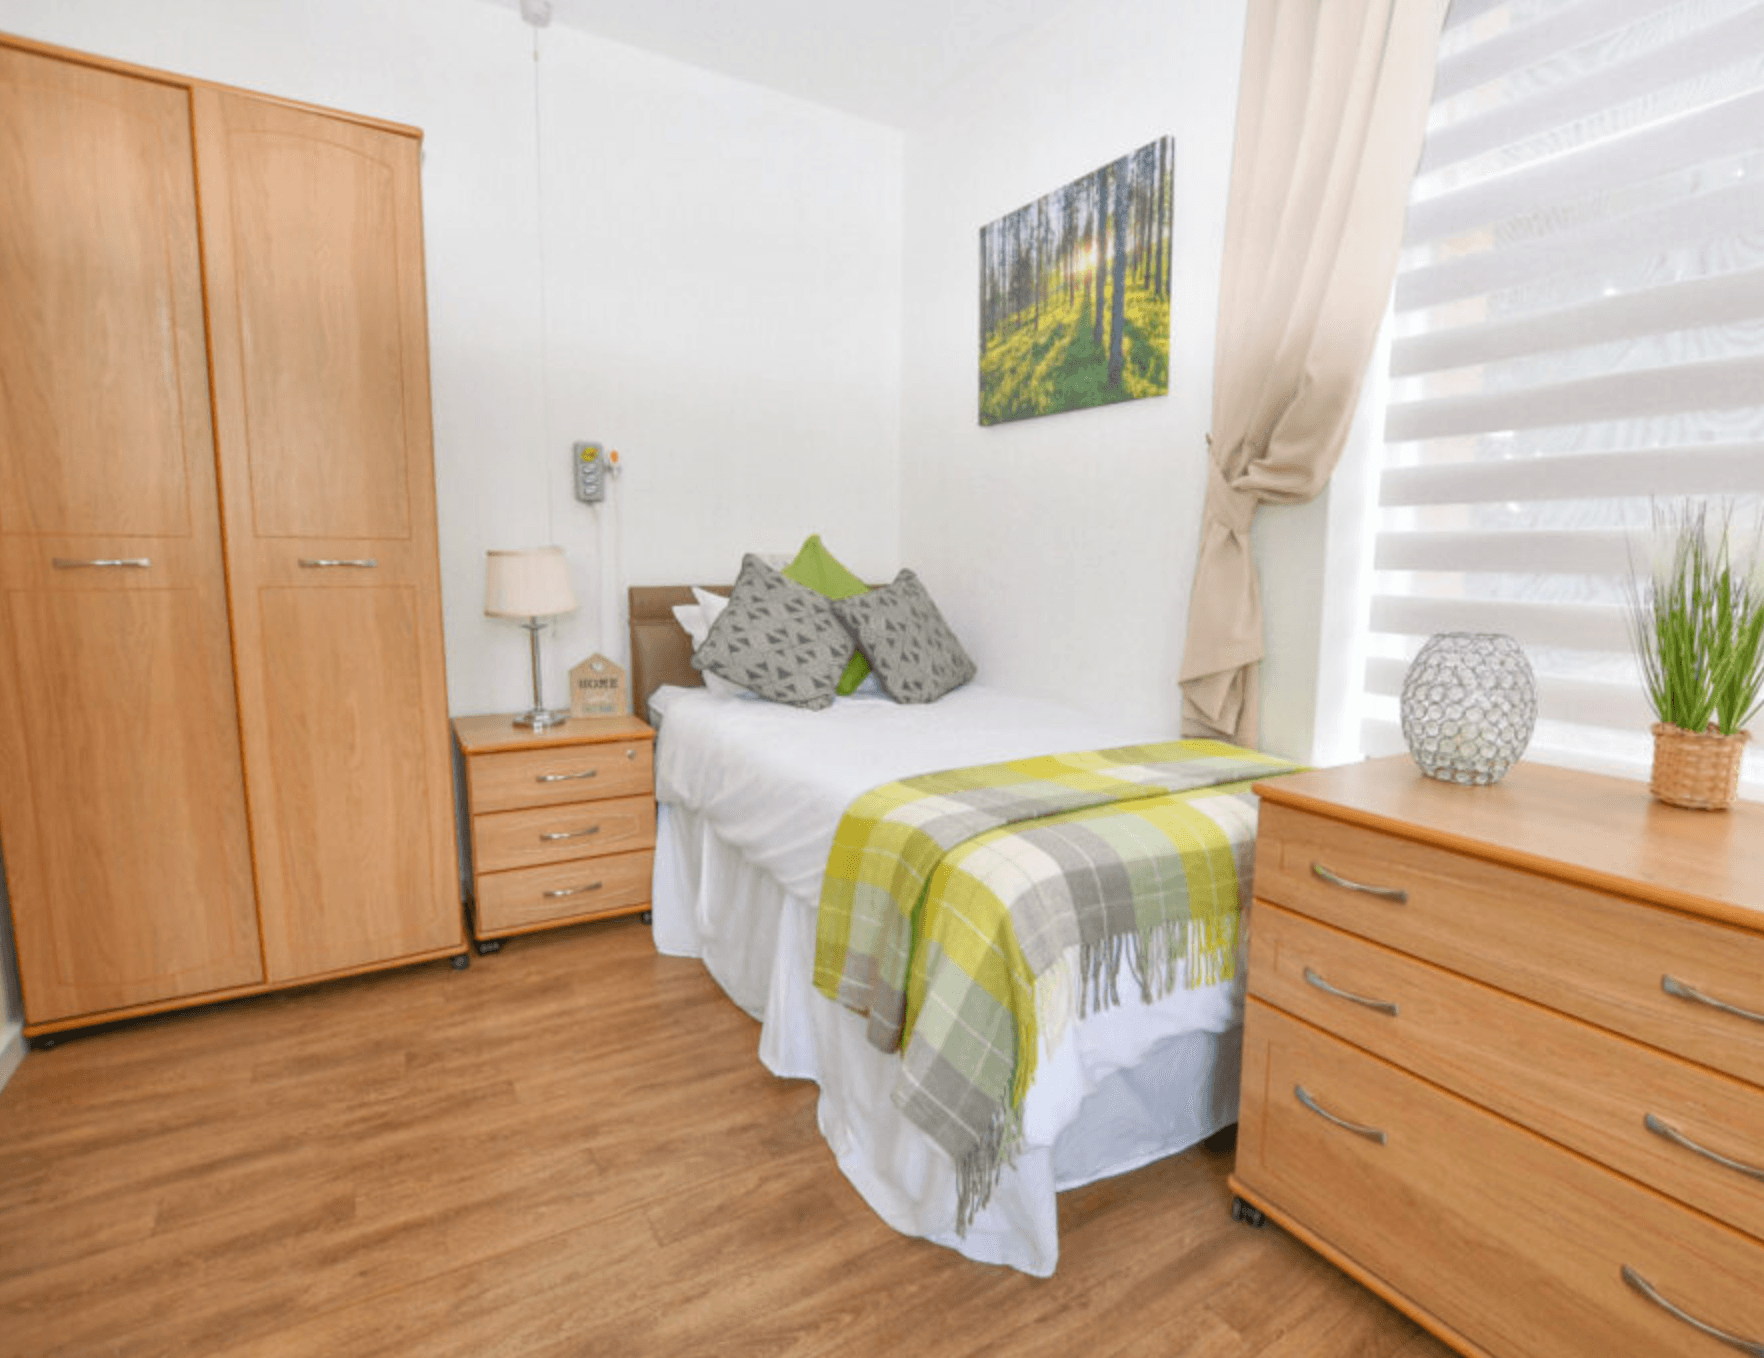 Bedroom of Whetstone Hey Care Home in Ellesmere port, Cheshire